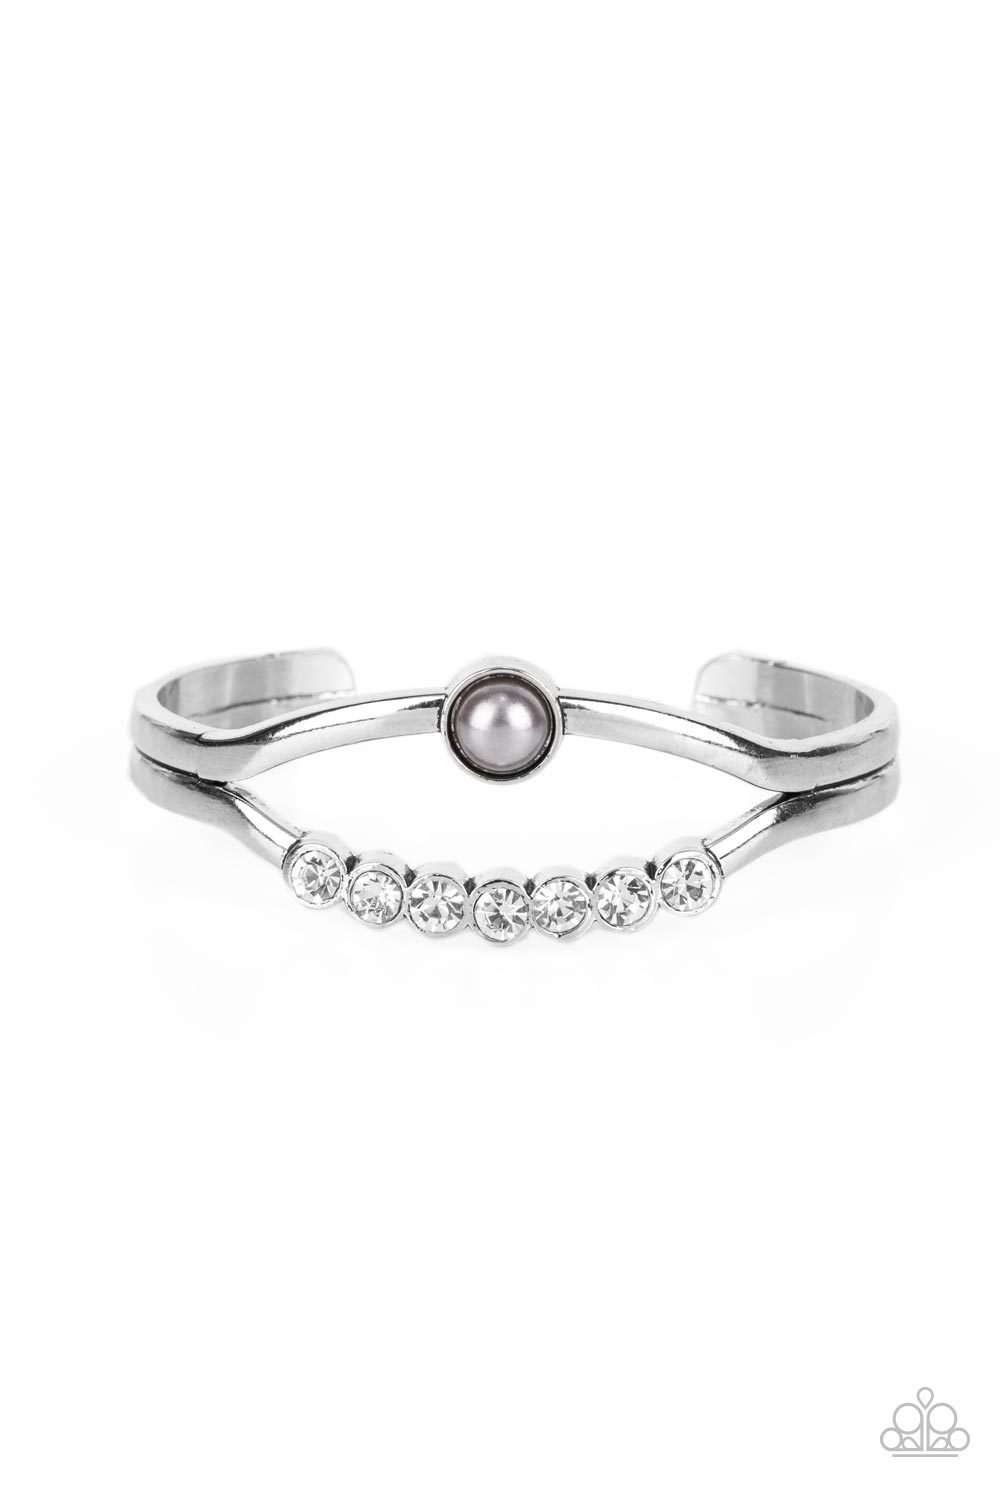 A row of white rhinestones and a solitaire silver pearl adorn the layered center of a classic silver cuff